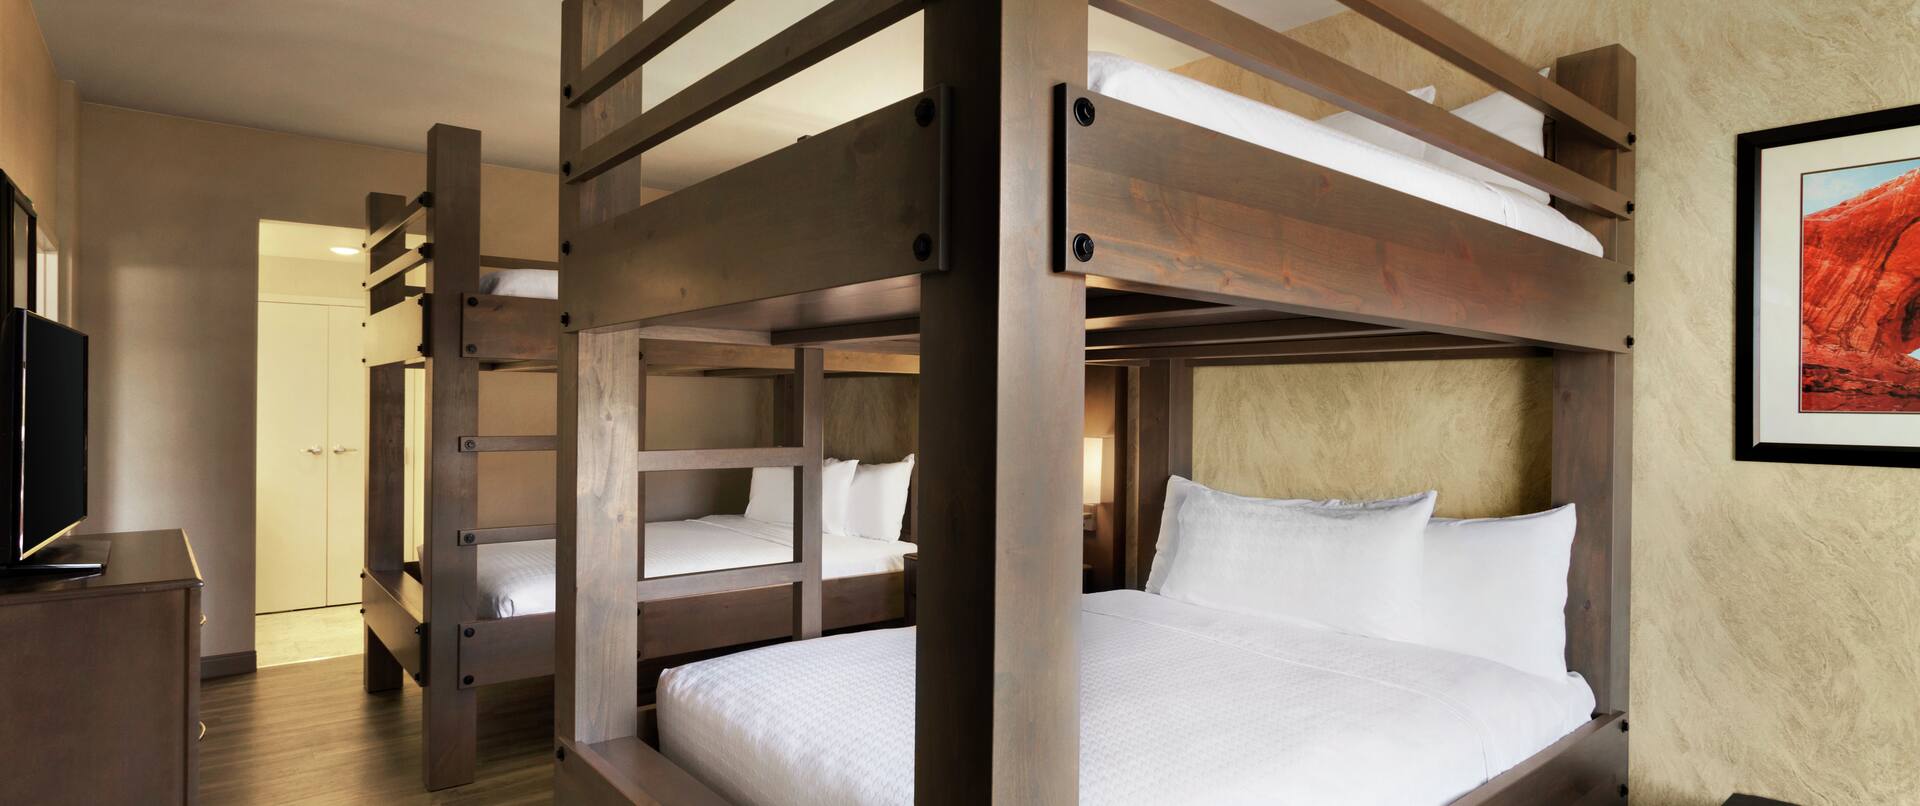 Guest Room with Bunk Beds